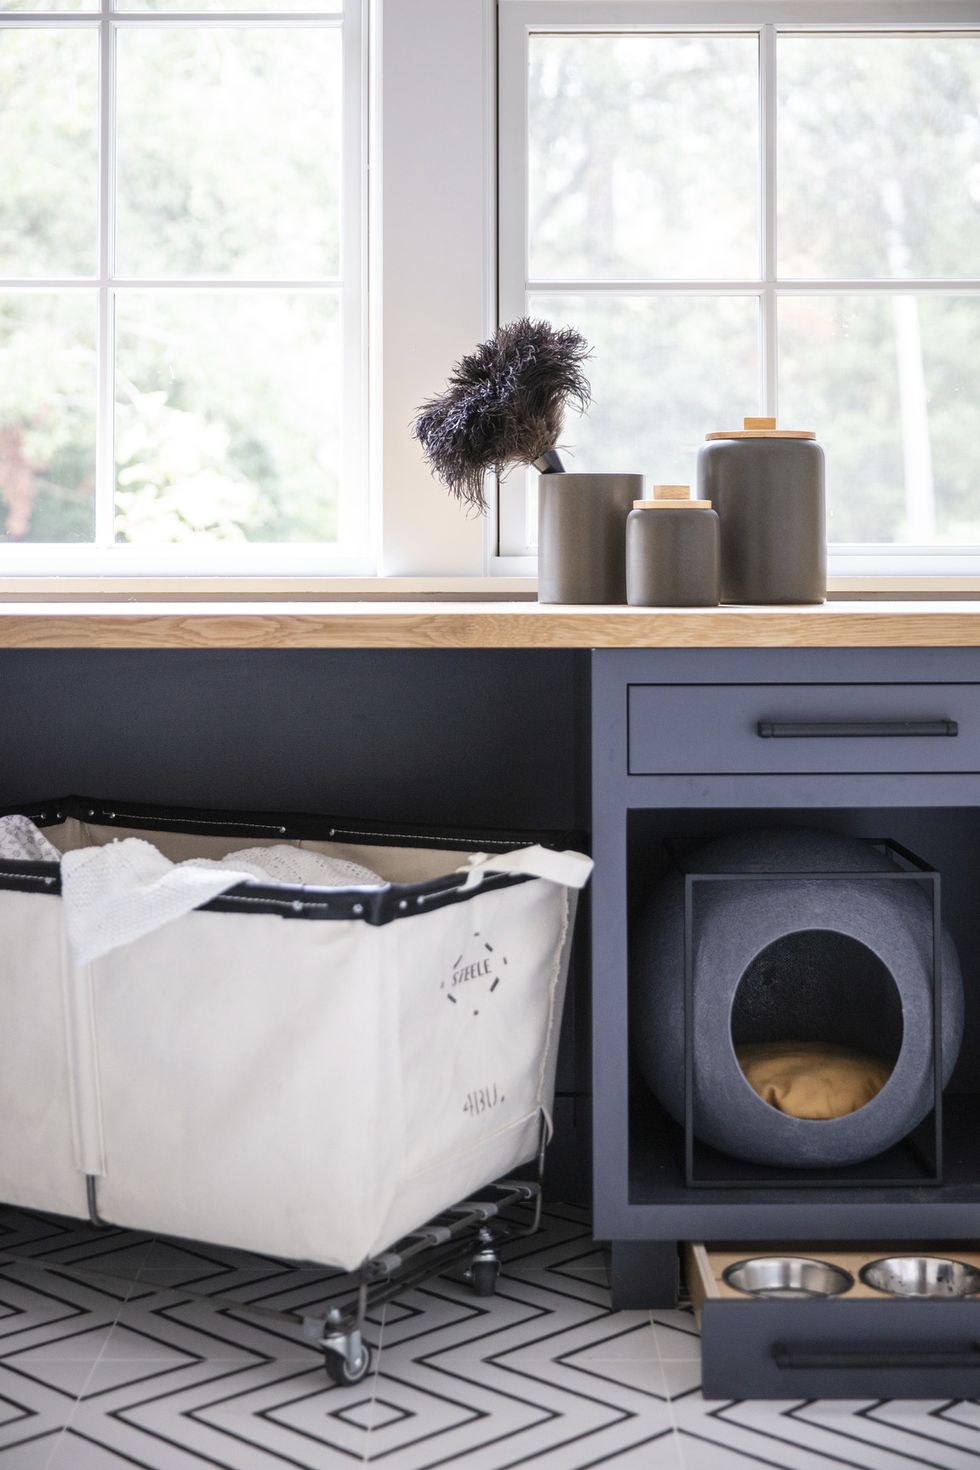 food and water bowl drawer and
orb bed from meyou paris in laundry room designed by emilie munroe